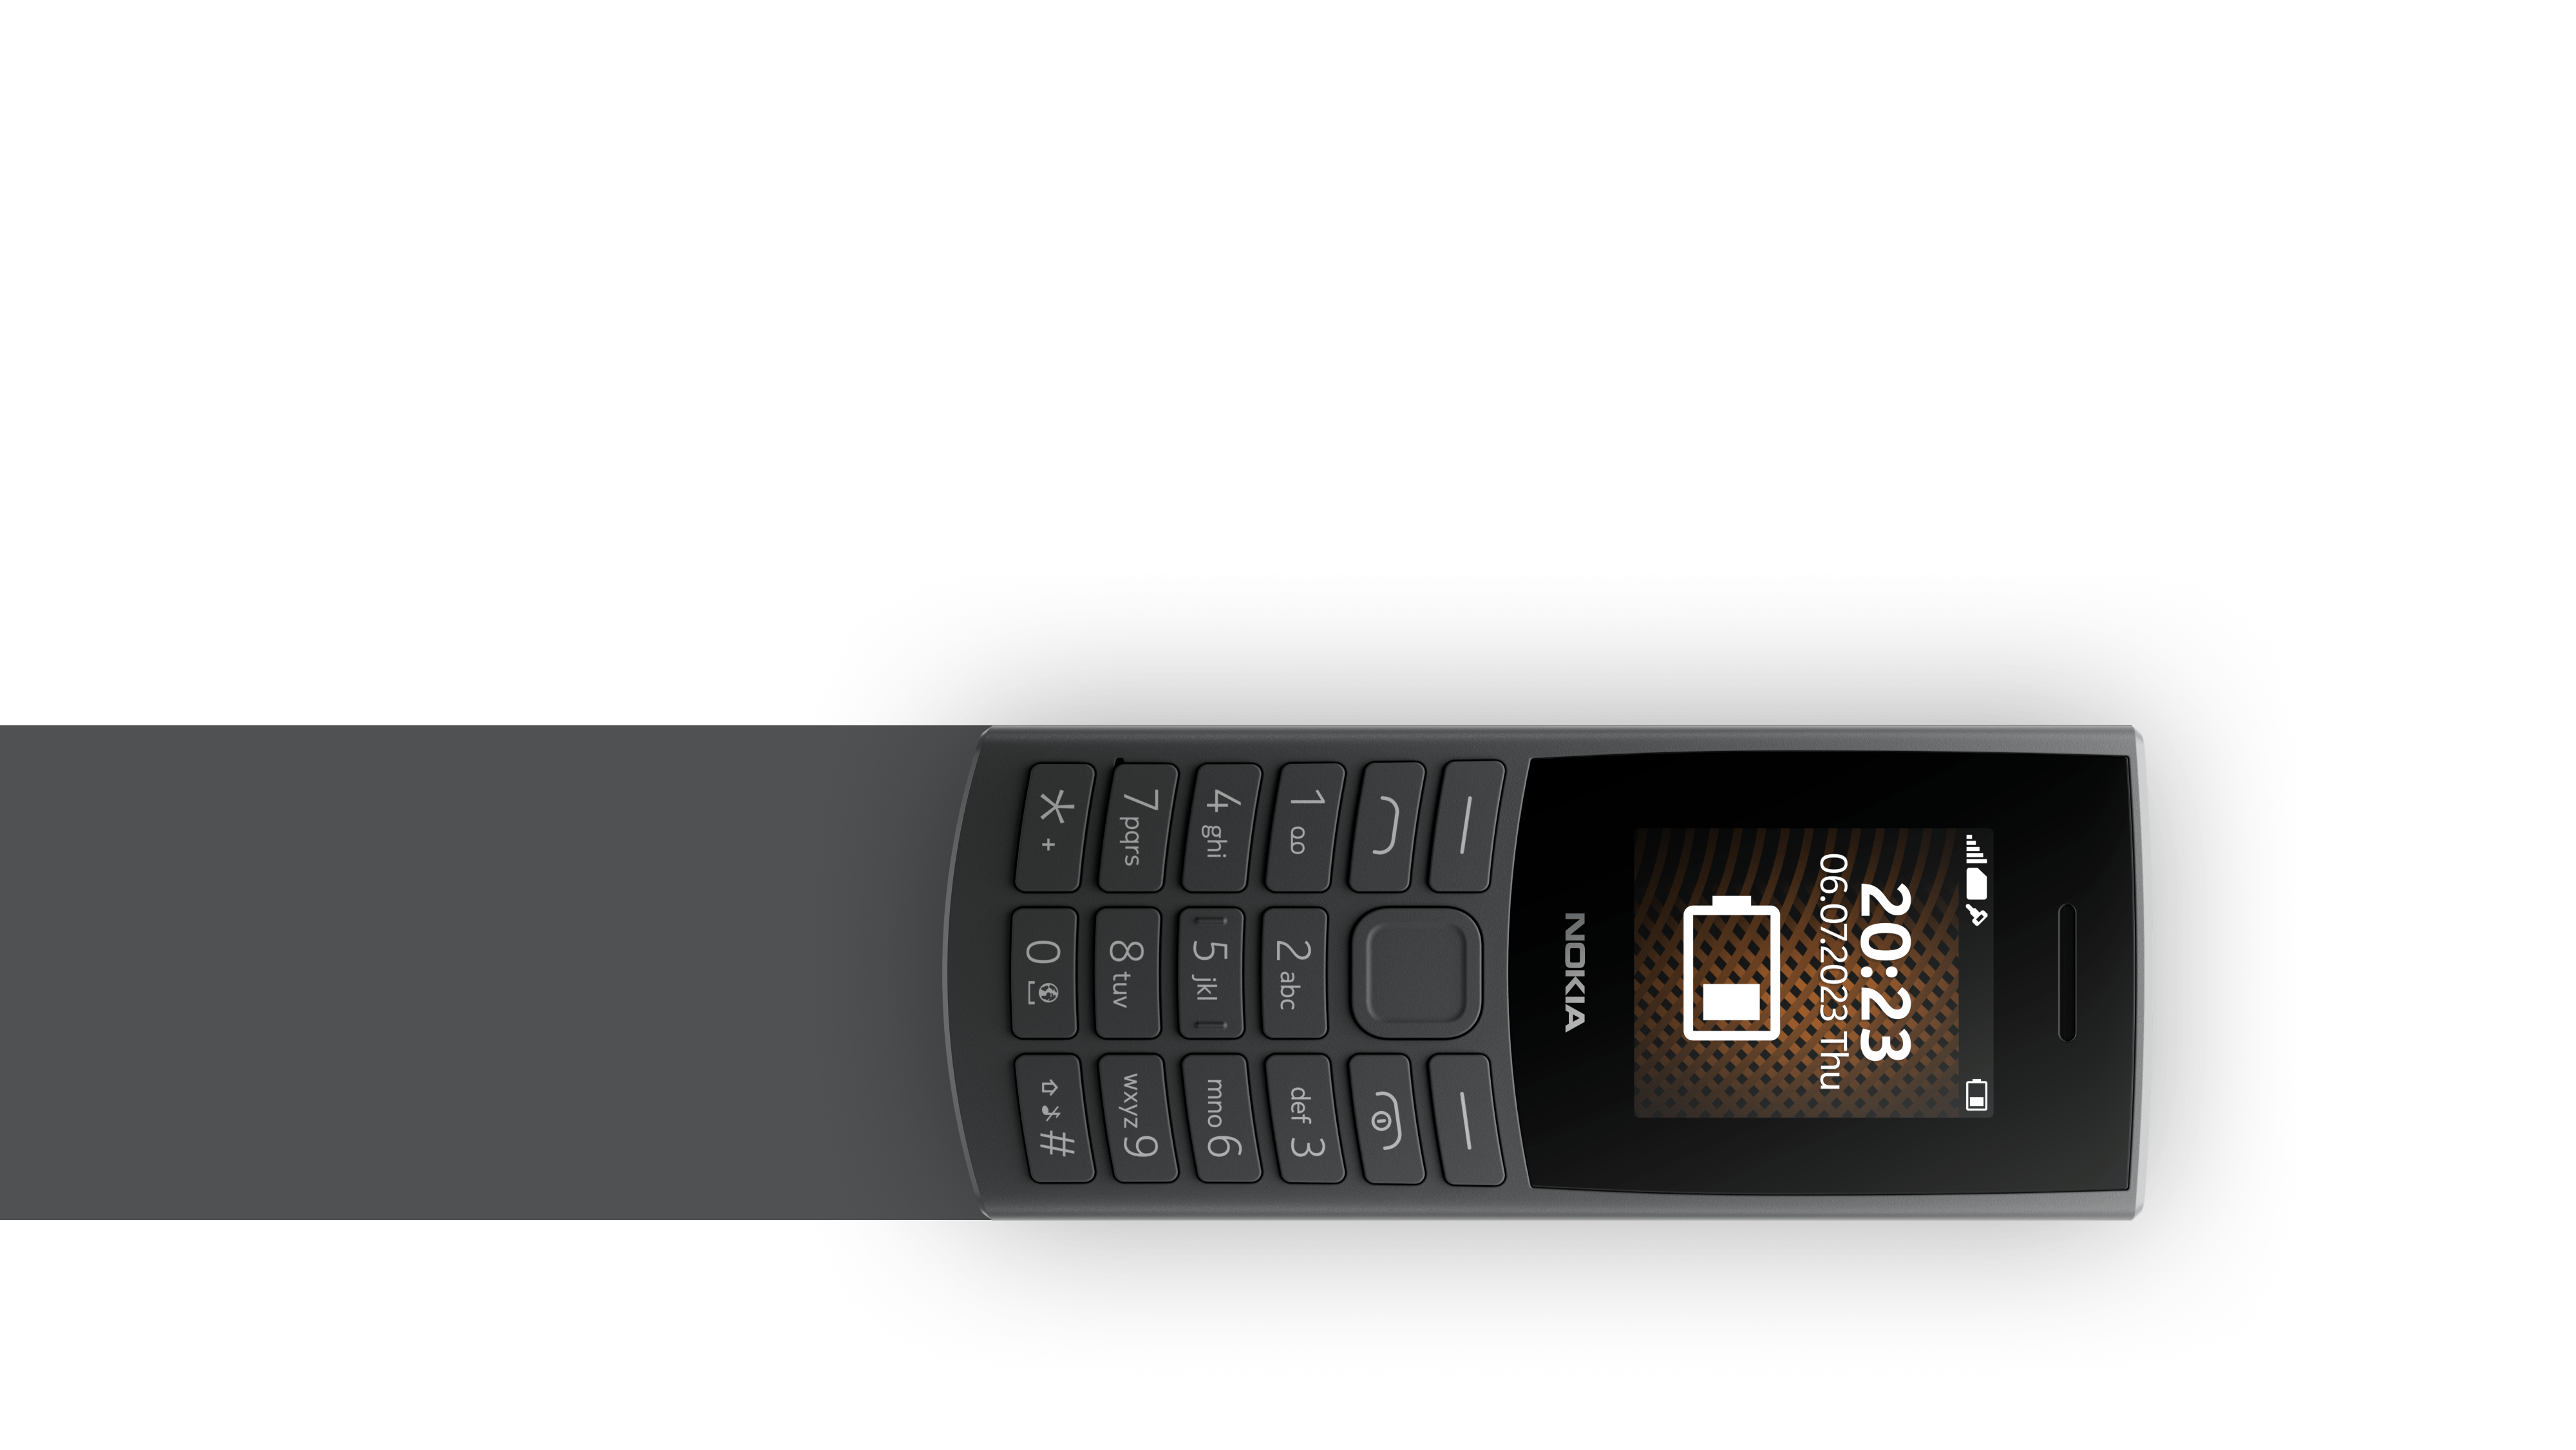 feature internet 4G phone Nokia with 105